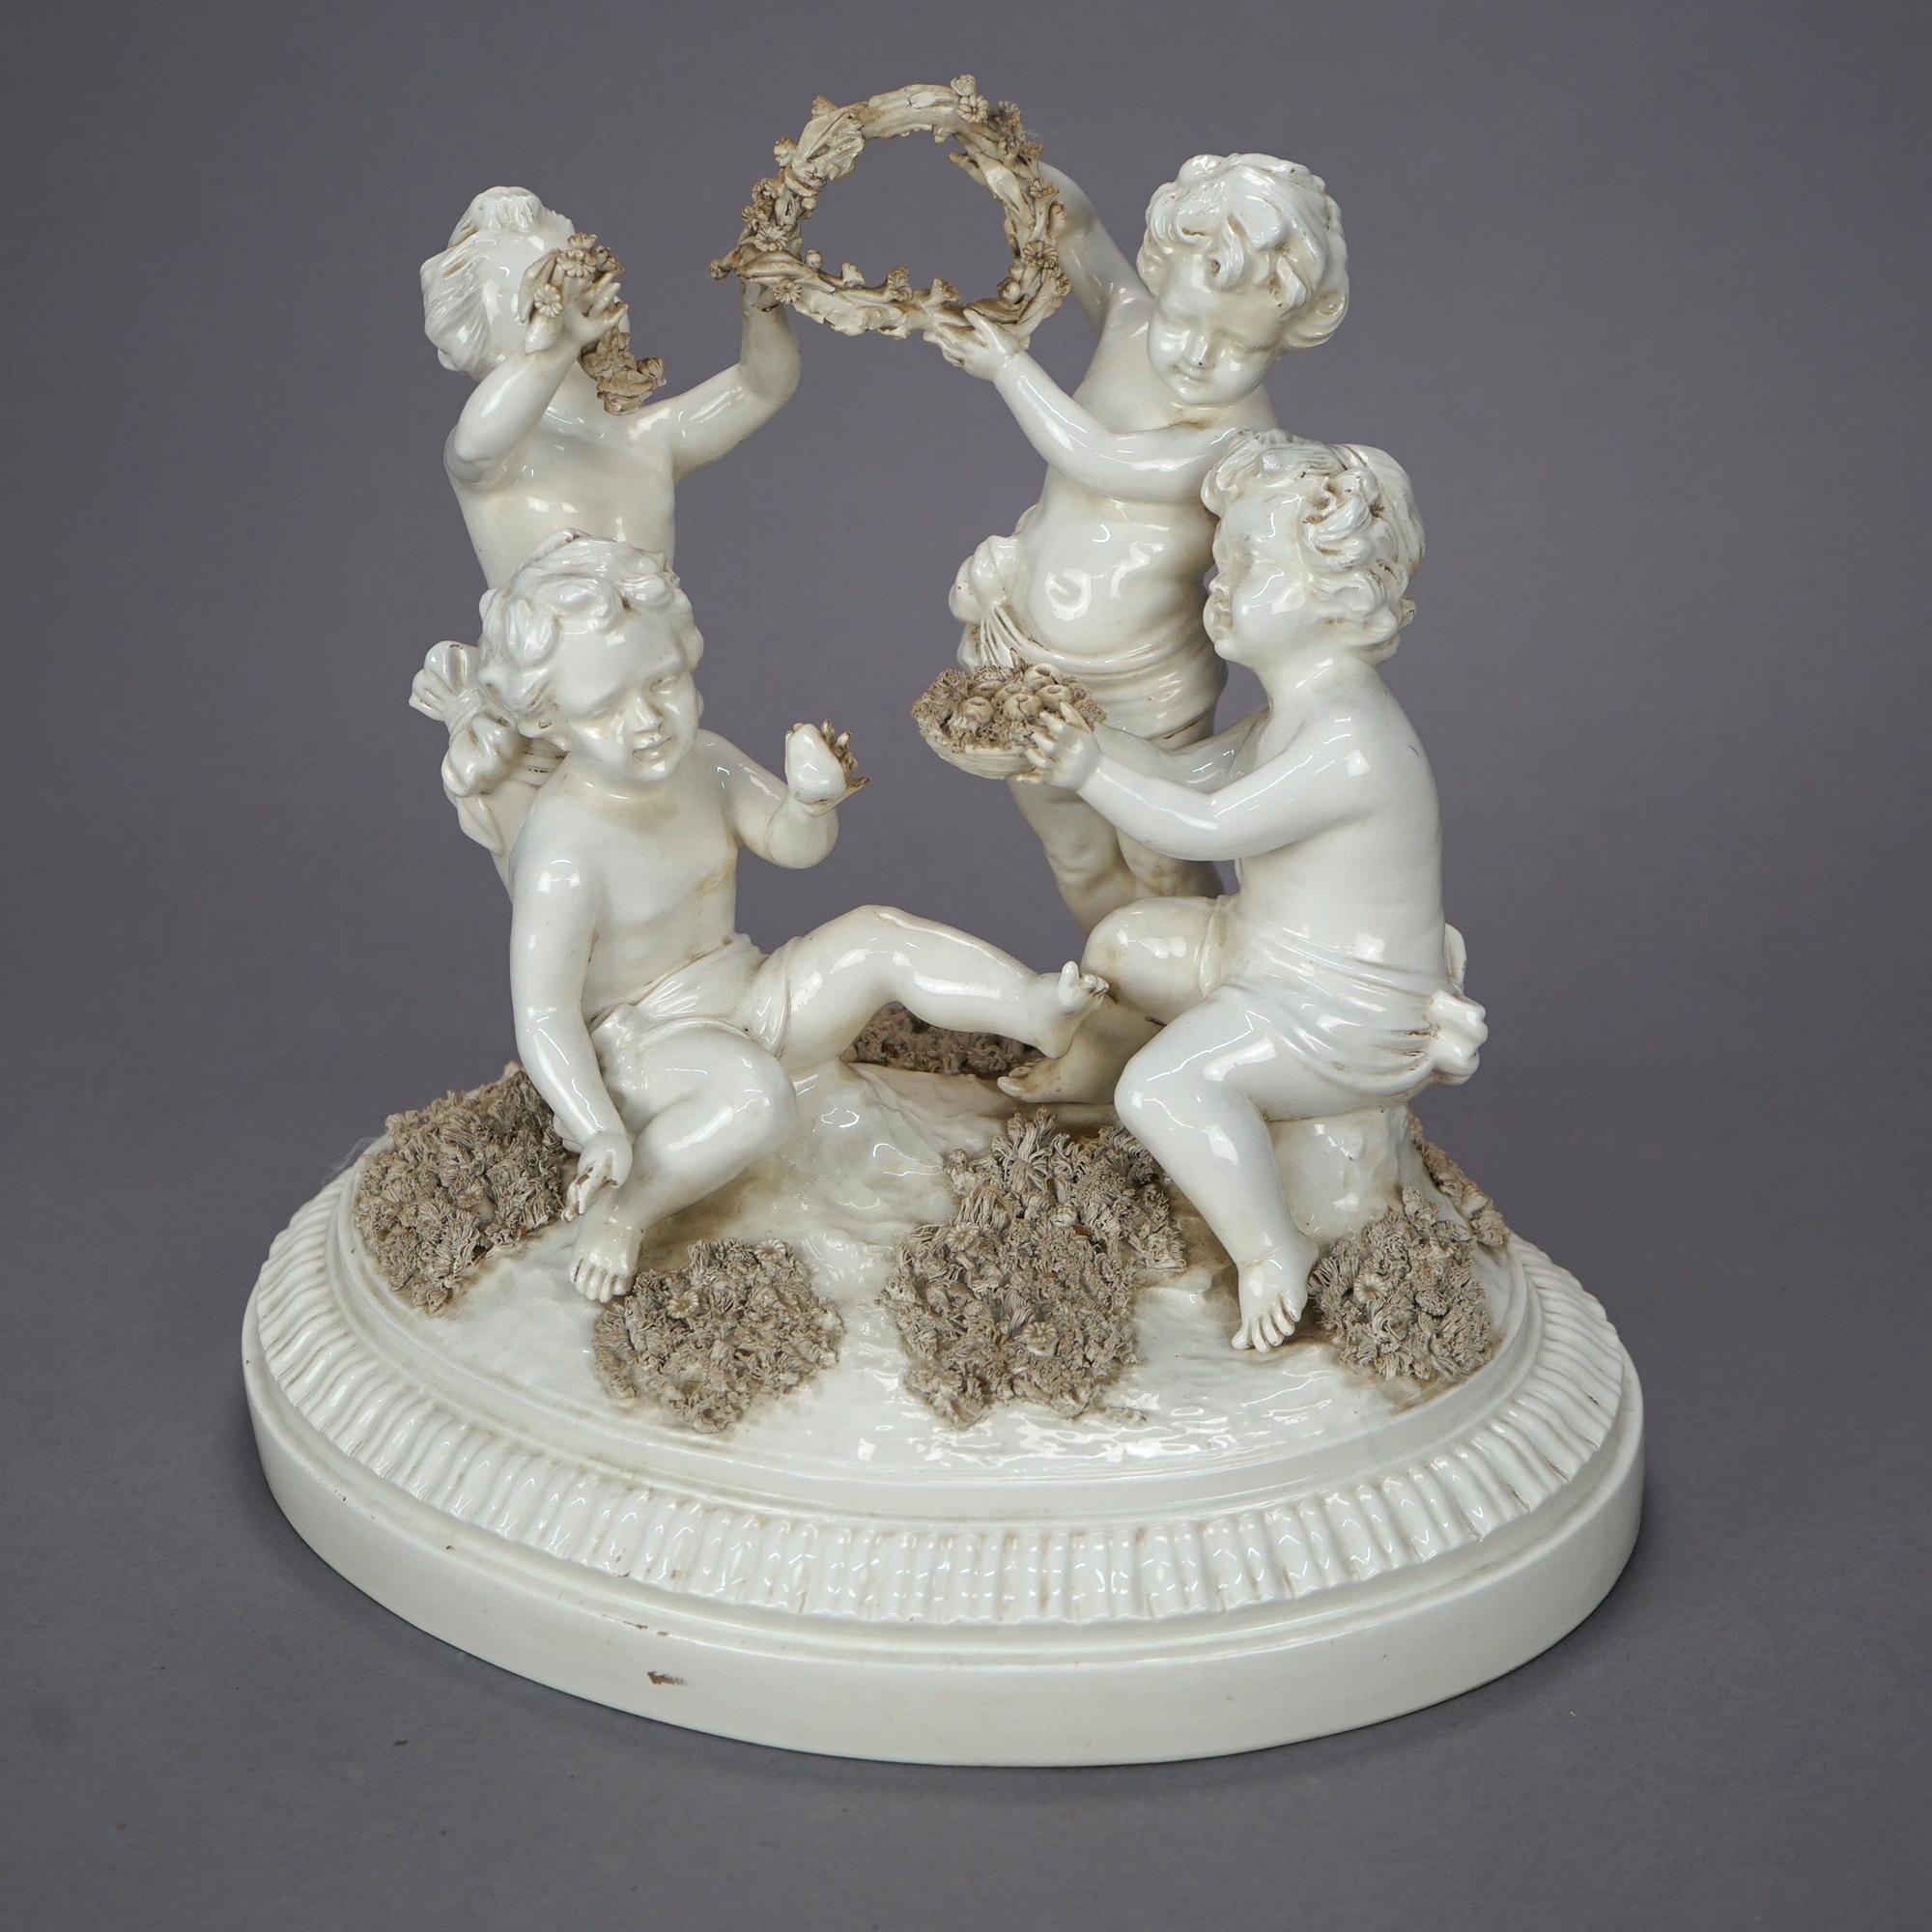 An antique Italian figural grouping offers porcelain construction with four putti in outdoor setting, Italy on base as photographed, circa 1900

Measures- 12''H x 12.5''W x 9.5''D.